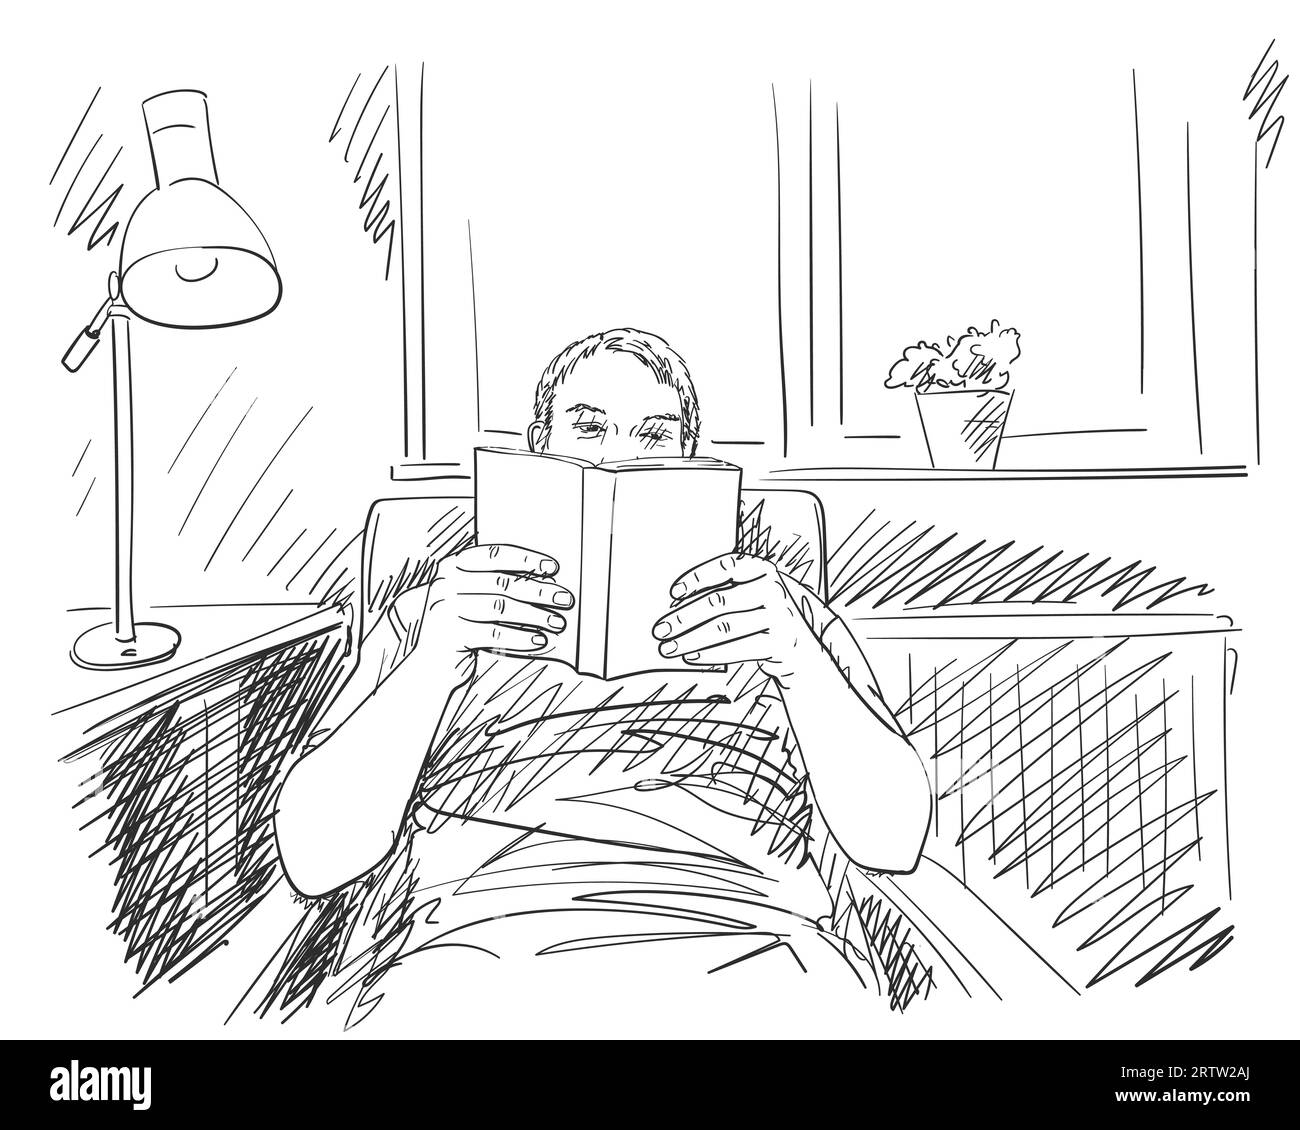 Sketch of man reading book in comfortable relaxing home atmosphere, Hand drawn vector illustration with hatched shades Stock Vector